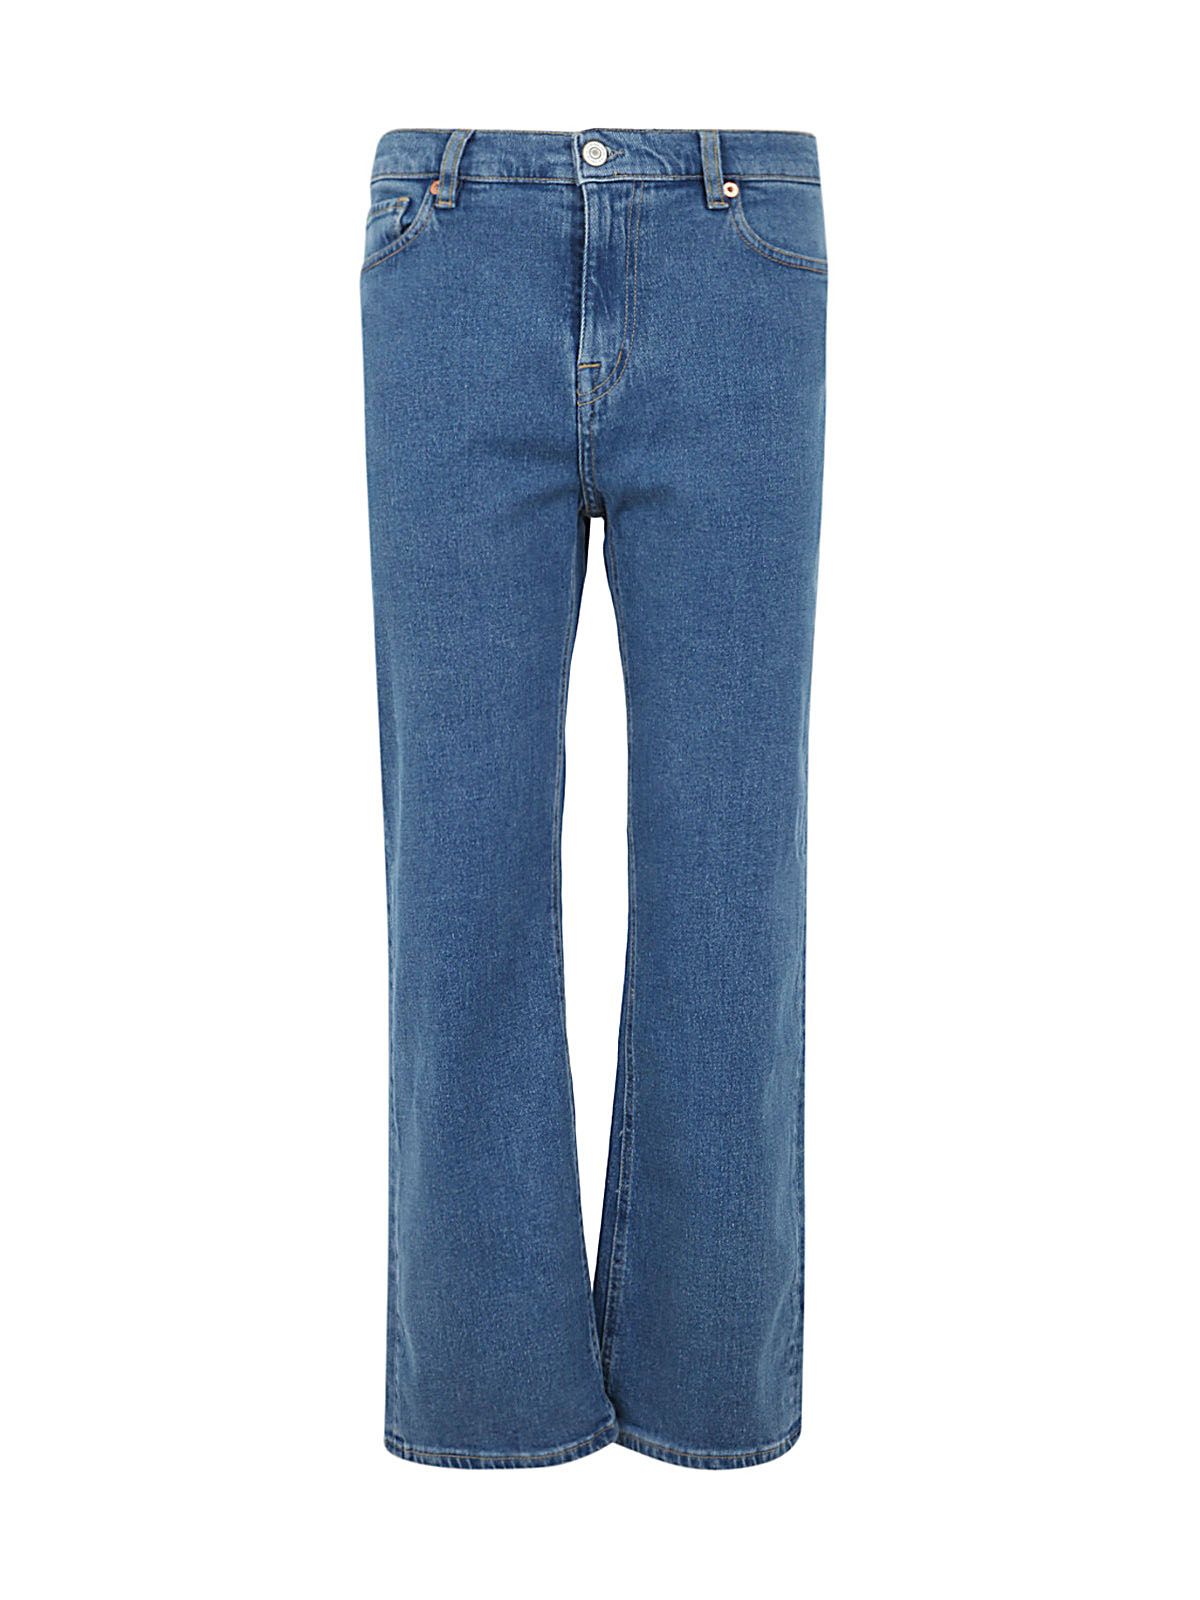 PS BY PAUL SMITH FLAIRED JEANS,W2R277TK21404